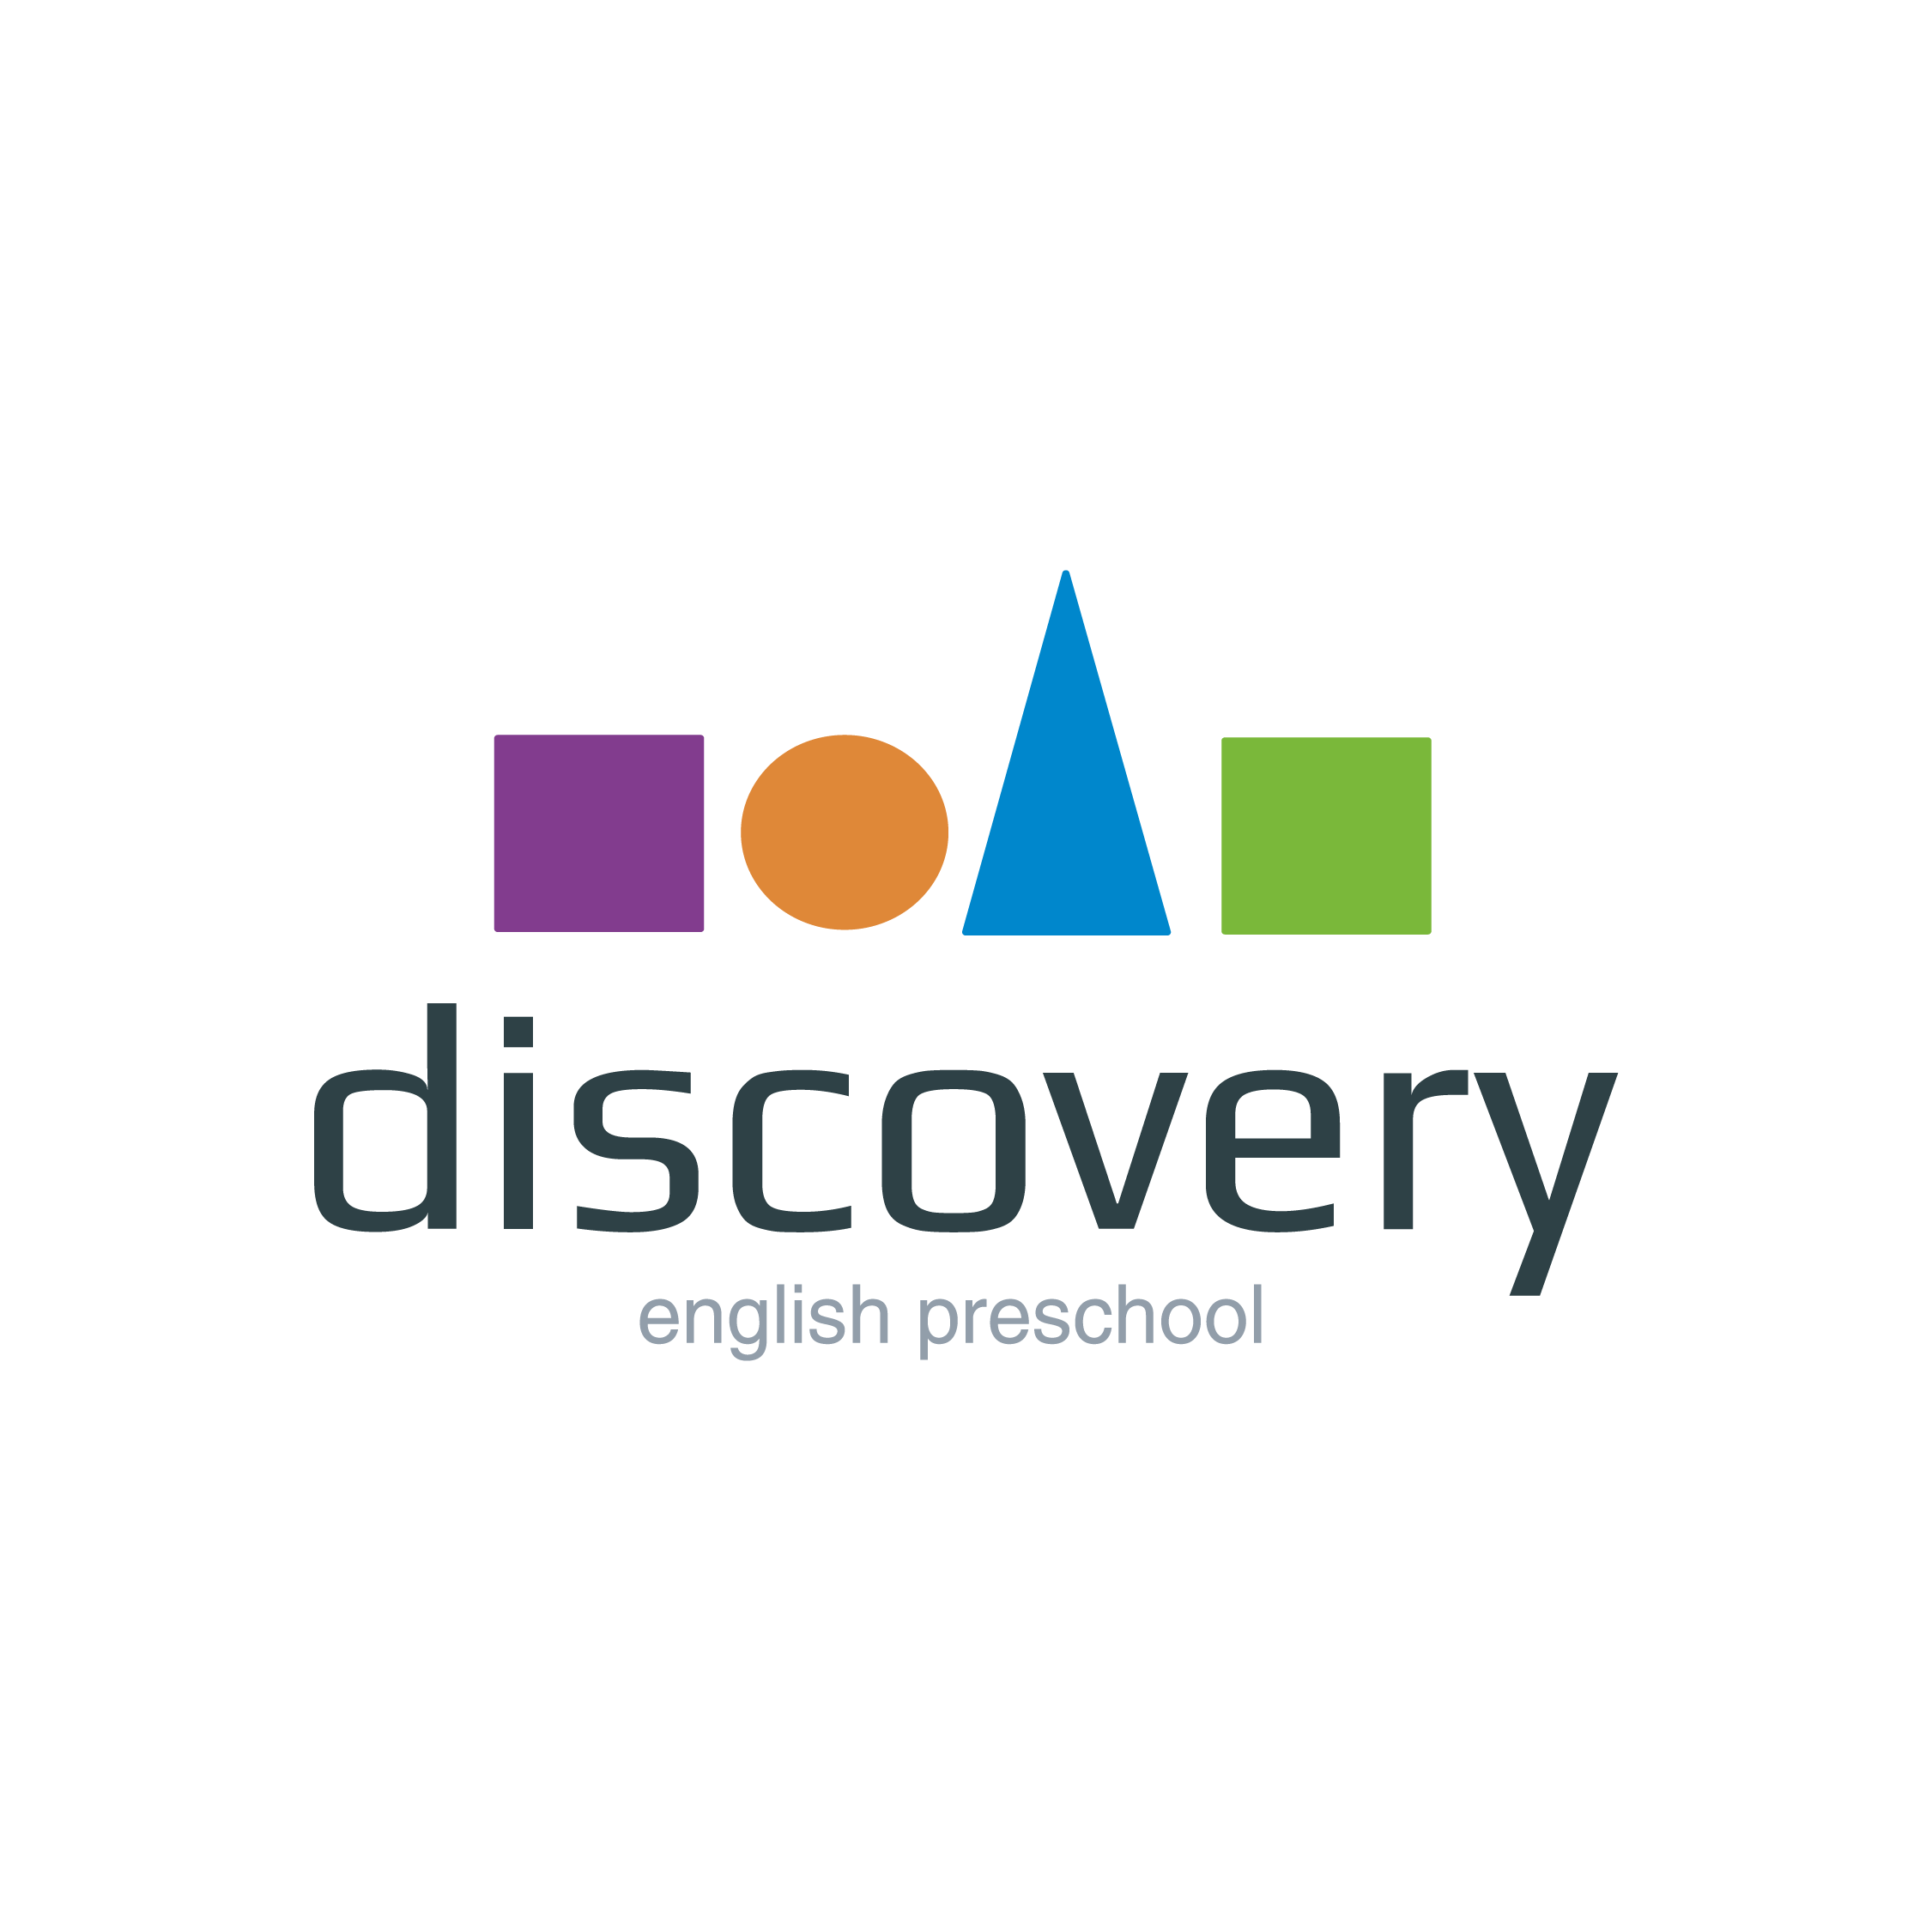 Discover profile. Дискавери детский сад лого. Discovery City детский сад. Discovery сад логотип. Логотип Дискавери англ сад.